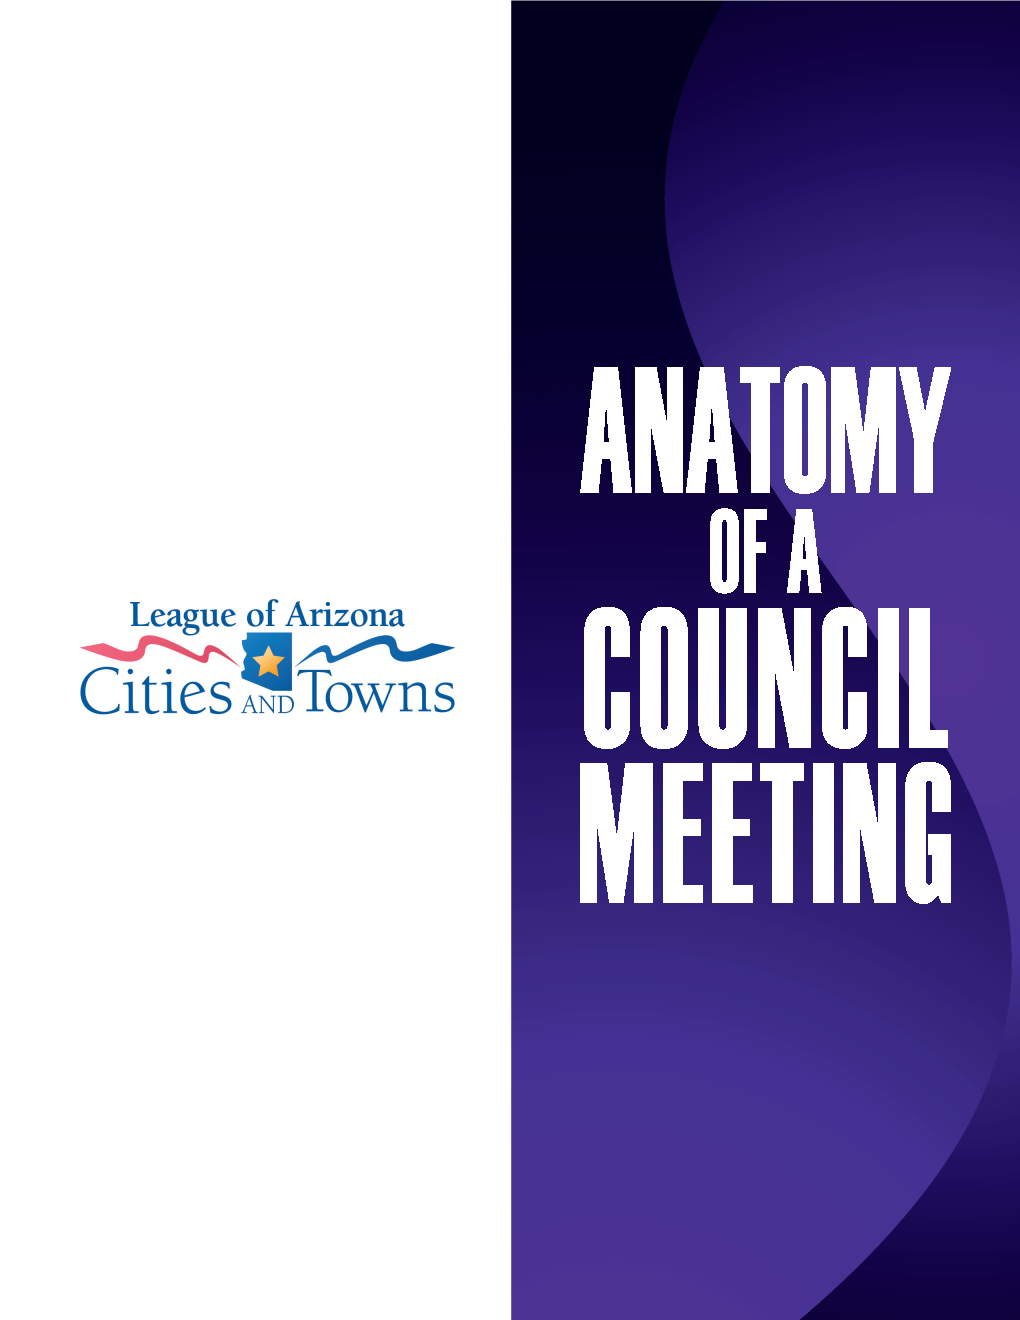 Anatomy of a Council Meeting